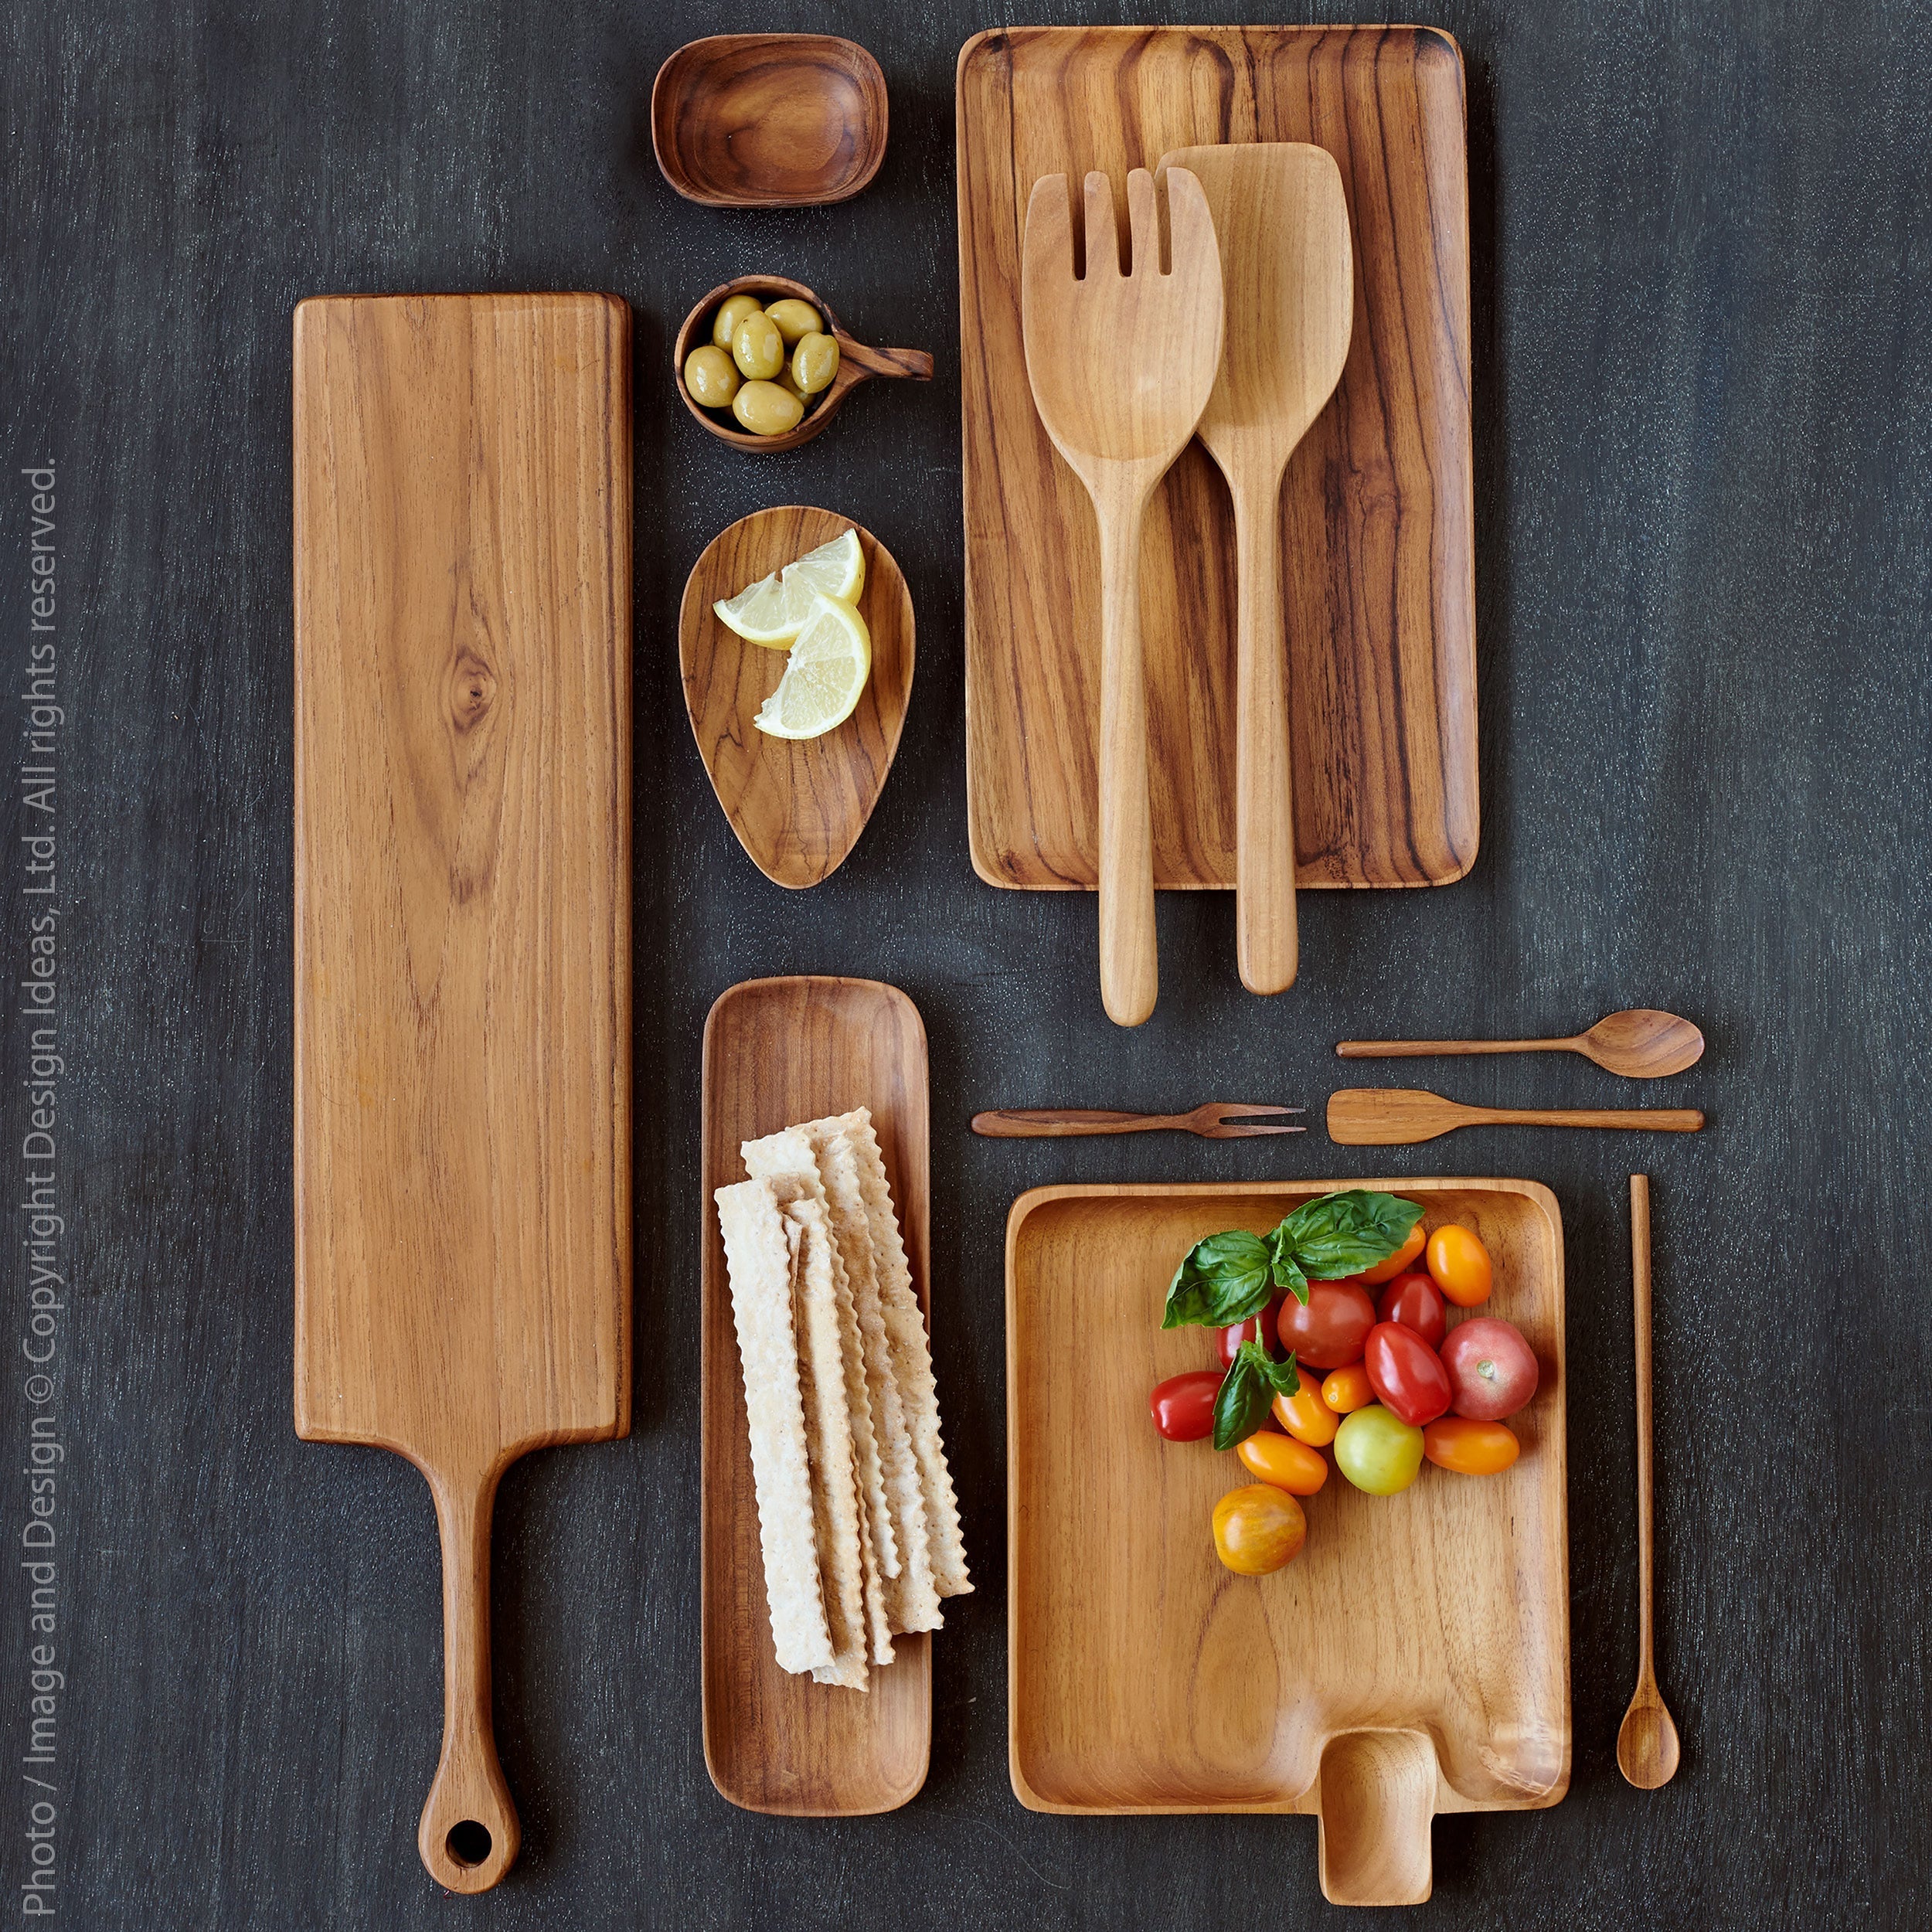 Chiku Teak Spoon Black Color | Image 3 | From the Chiku Collection | Expertly handmade with natural teak for long lasting use | These utensils are sustainably sourced | Available in natural color | texxture home